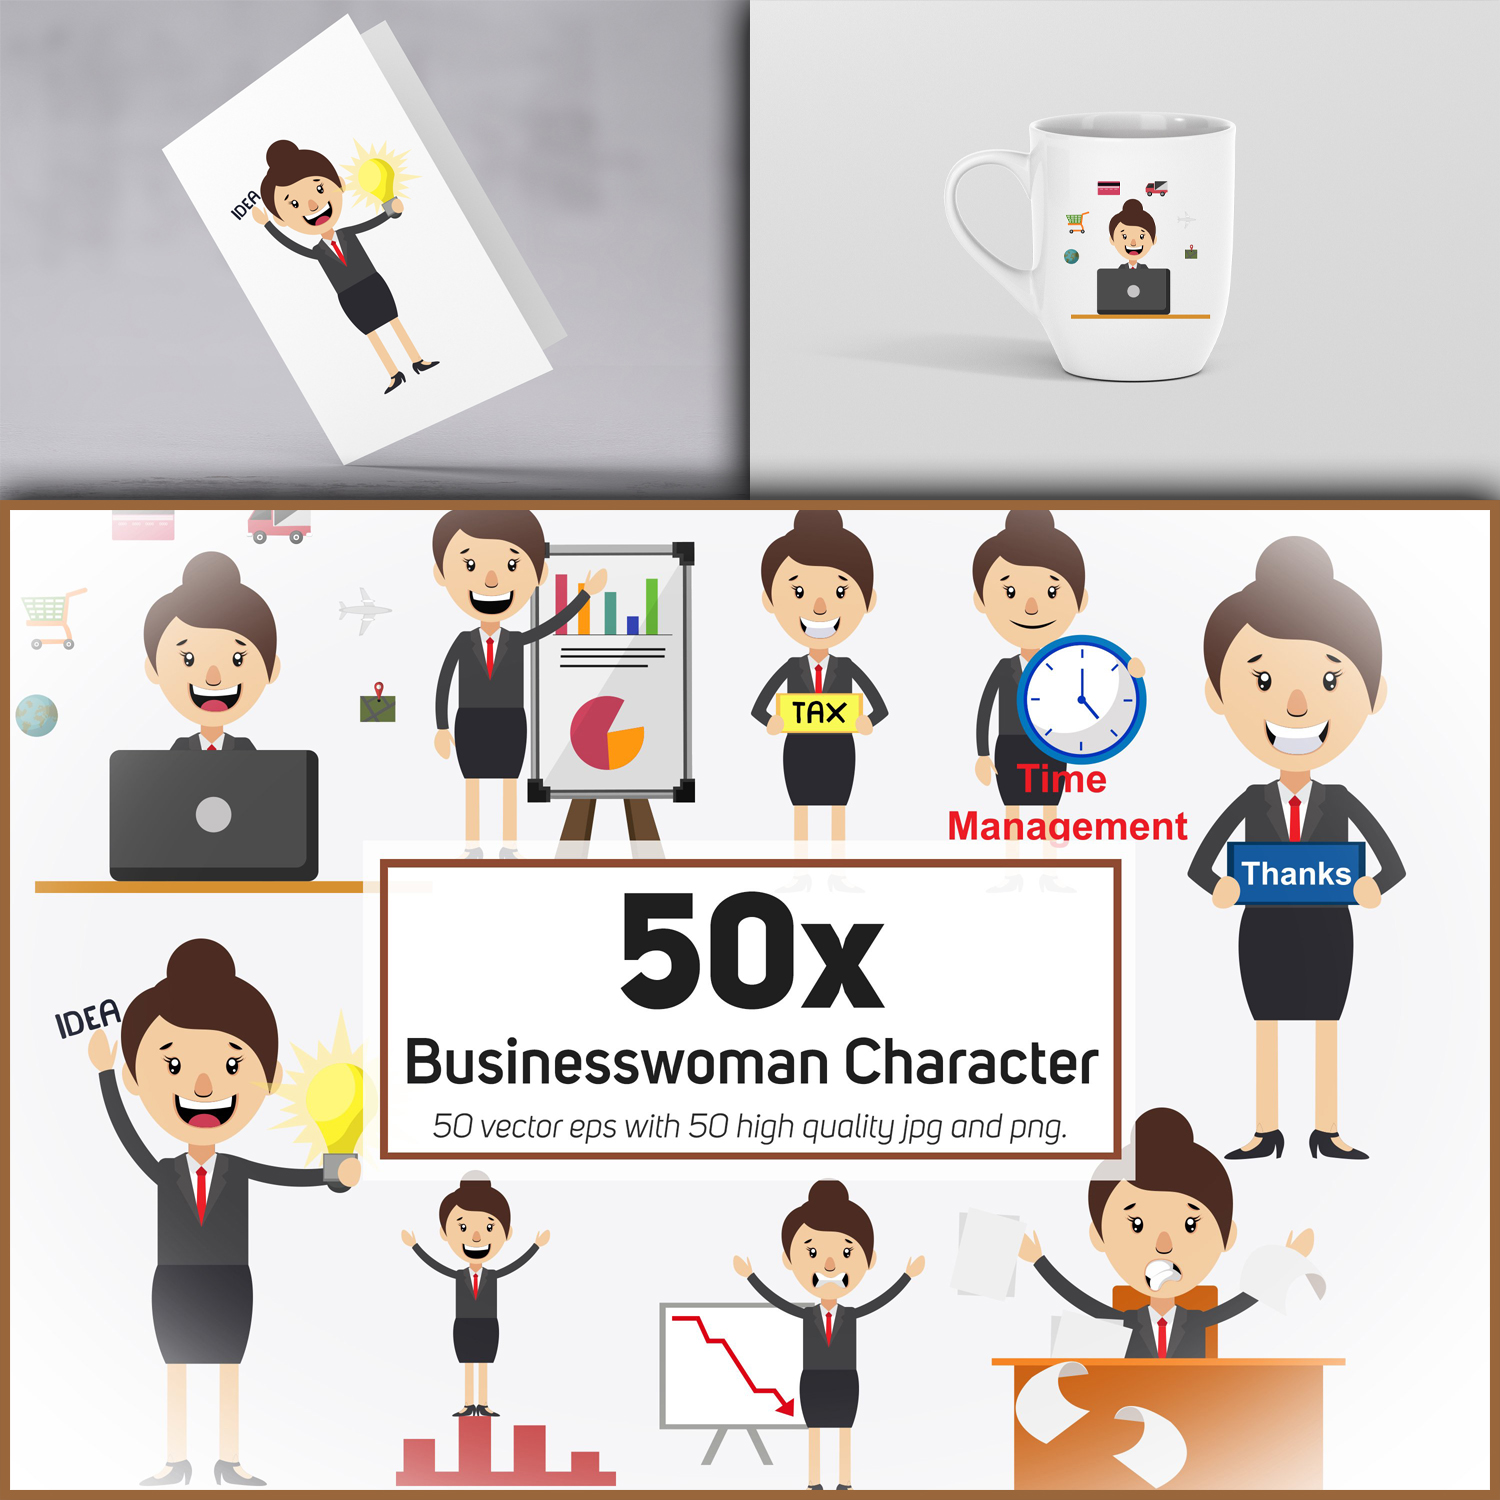 50x Businesswoman Character and Mascot Collection cover.